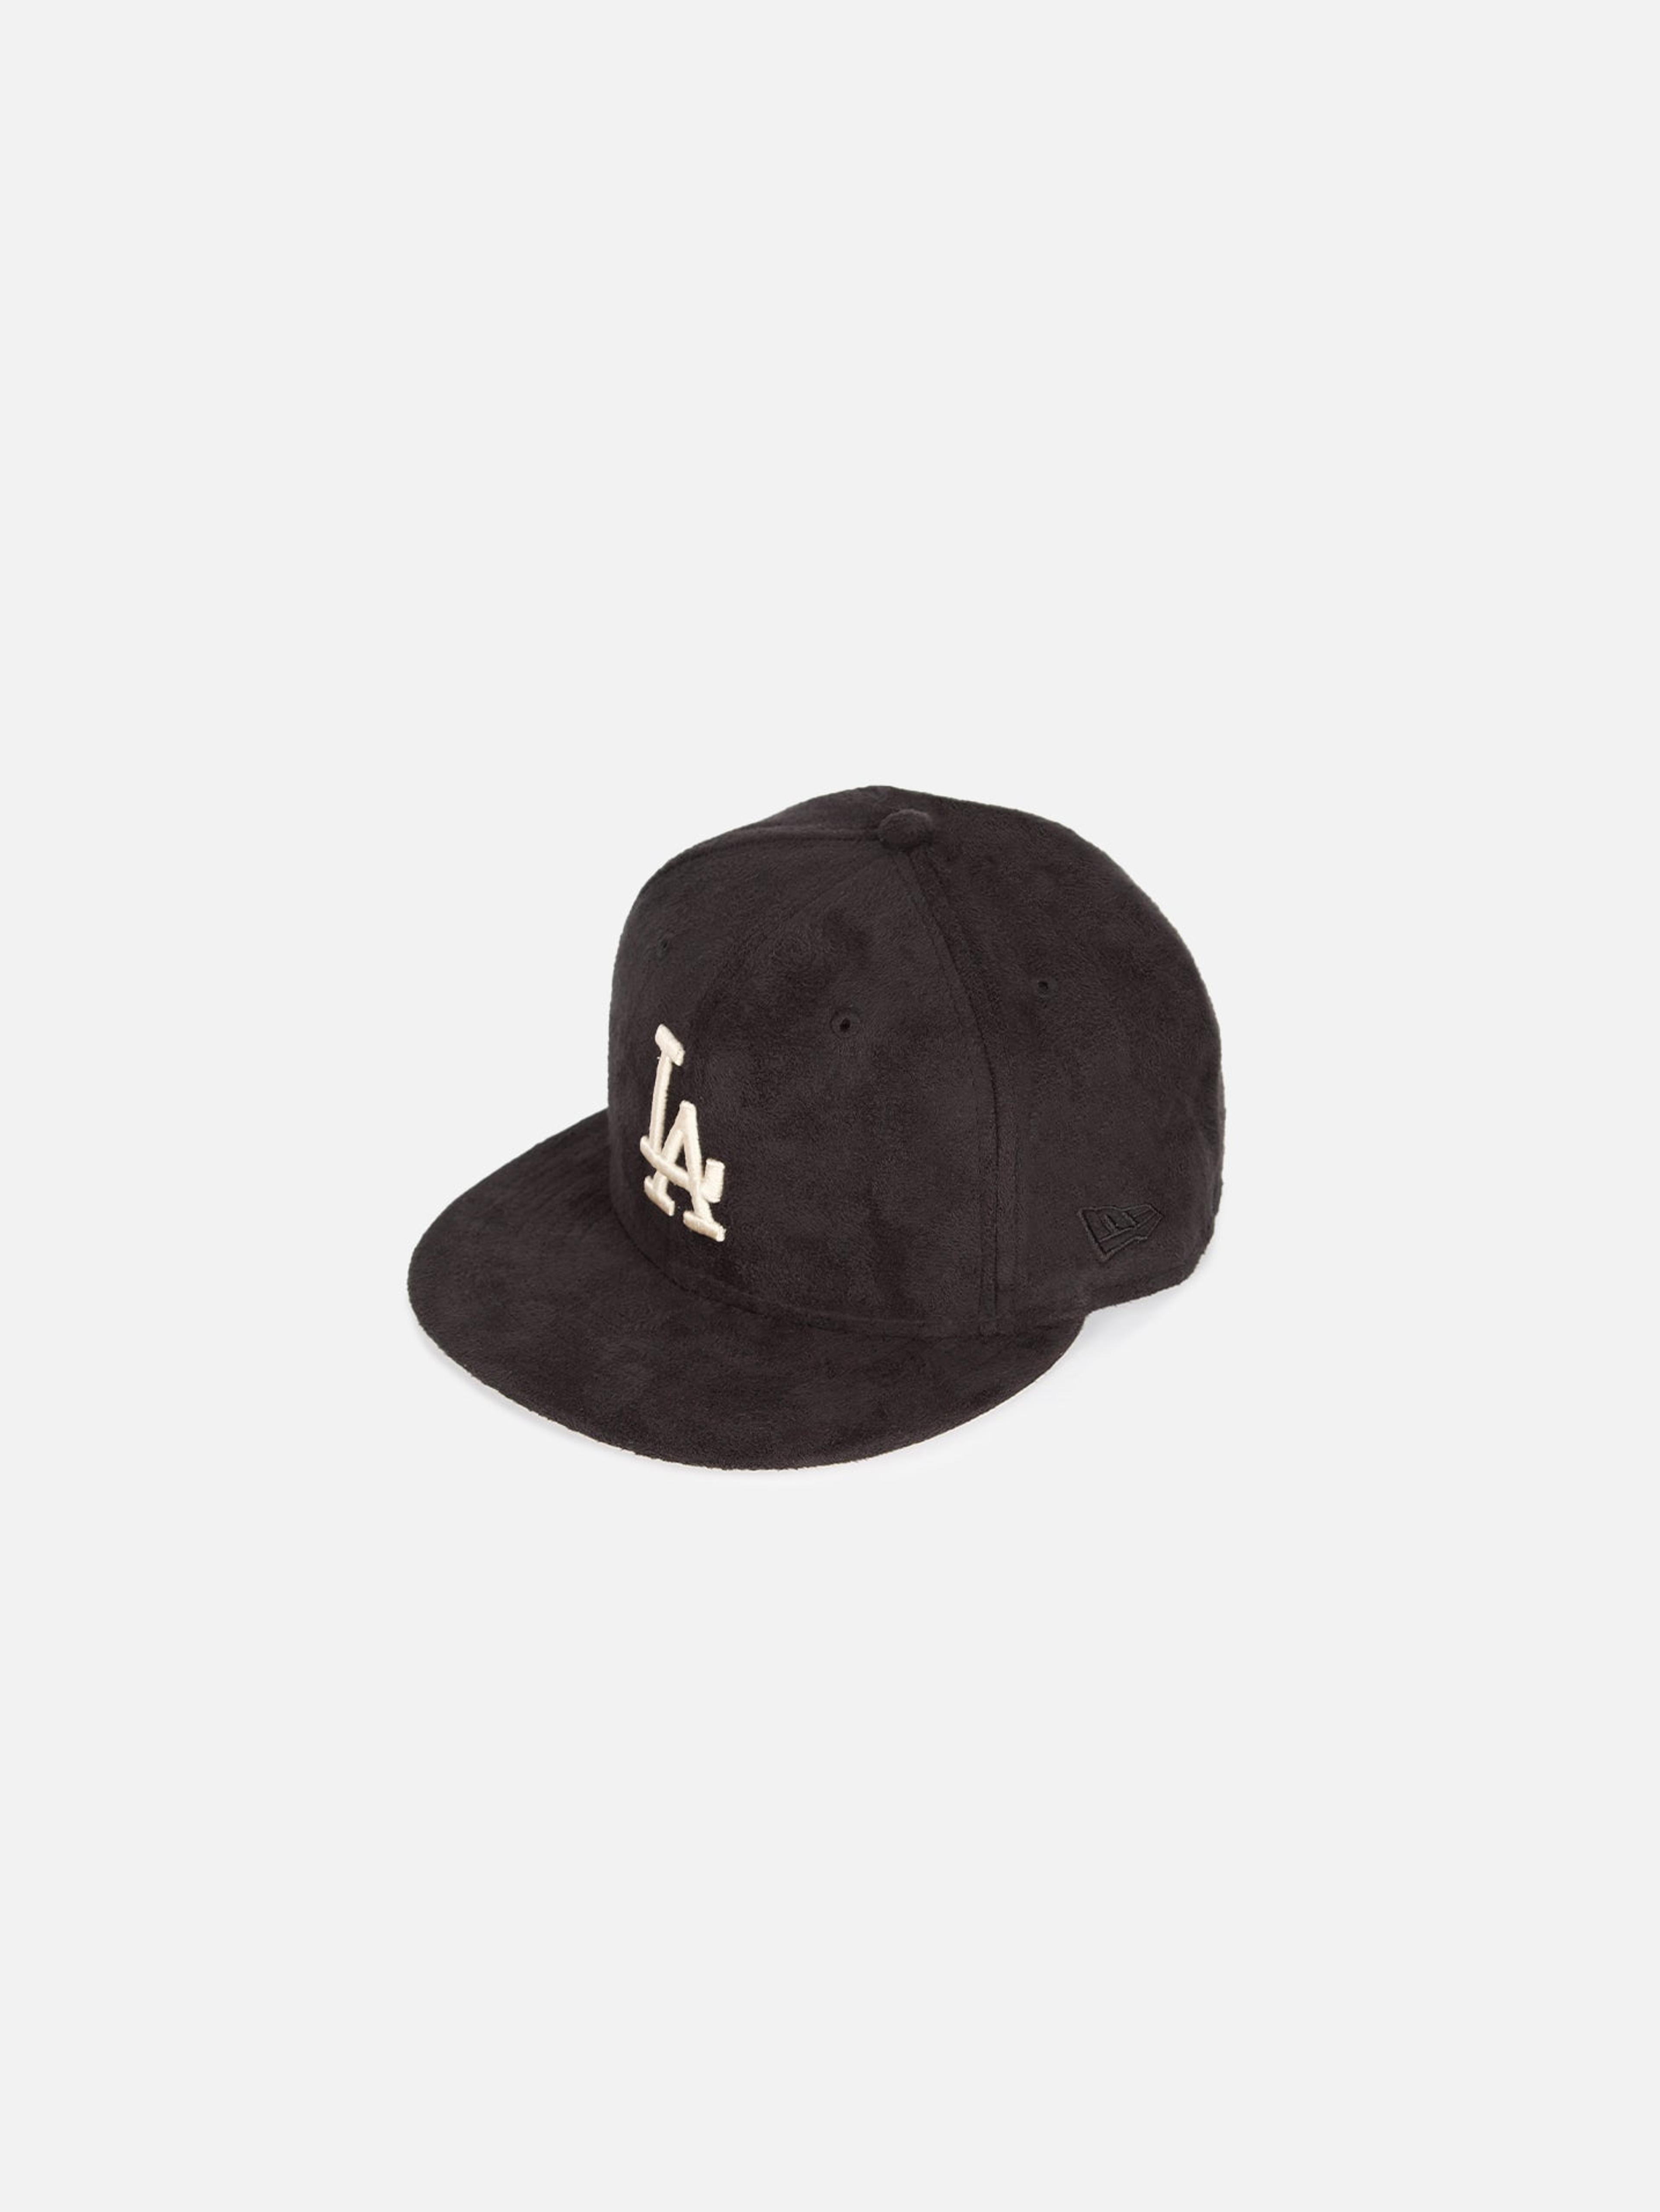 Alternate View 3 of Bricks & Wood x Dodgers New Era Fitted - Black Suede